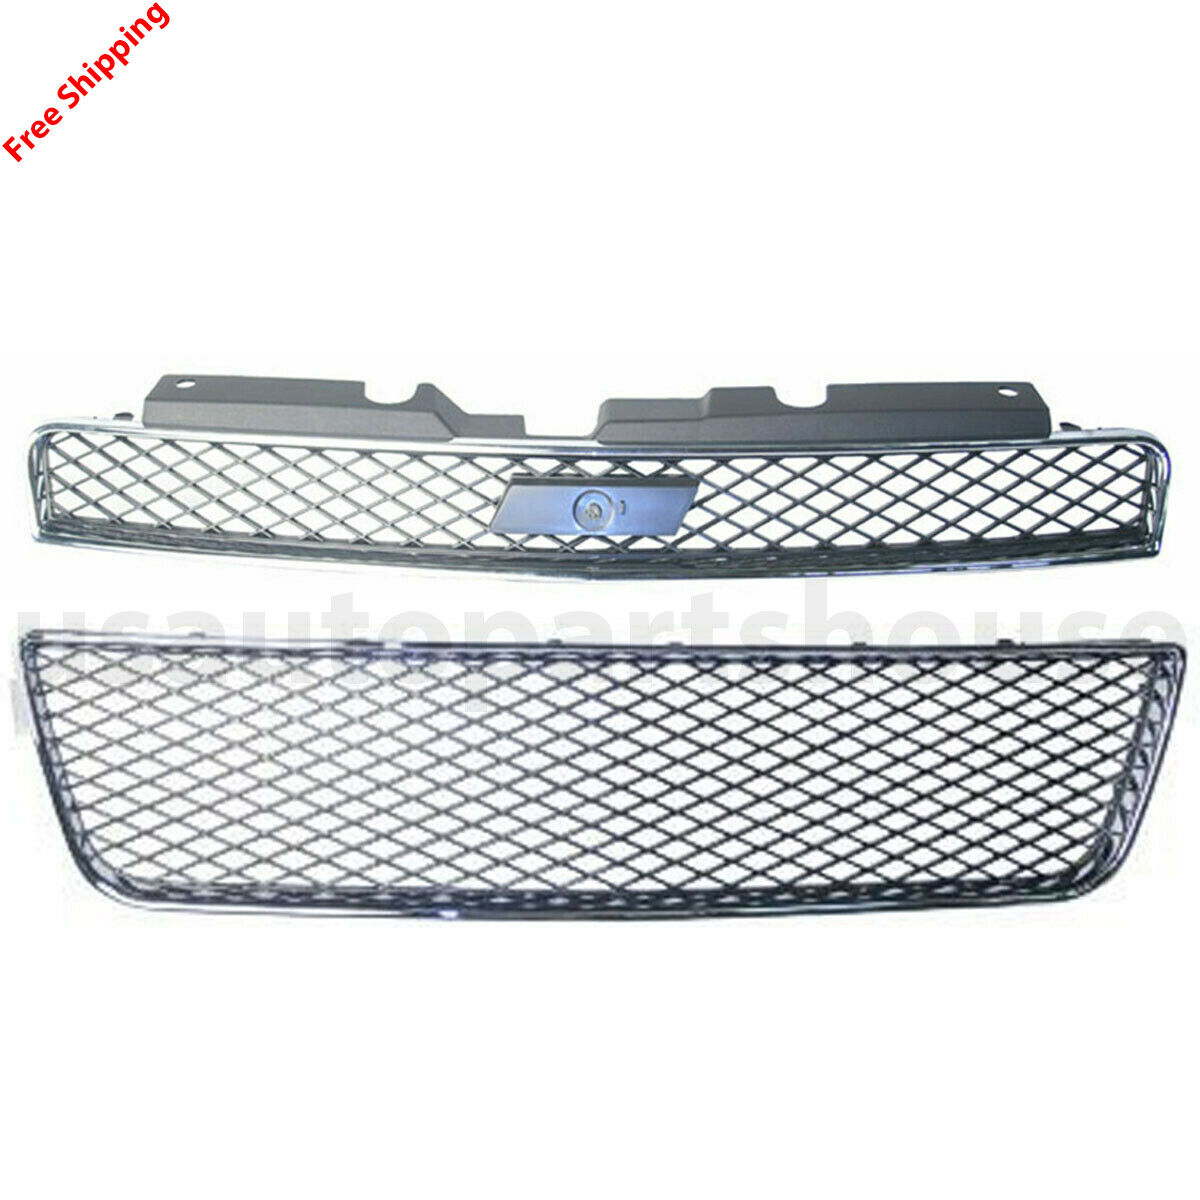 New Grille Bumper Cover Grill CHEVROLET IMPALA SS 2006-2013 GM1200551 GM1036107